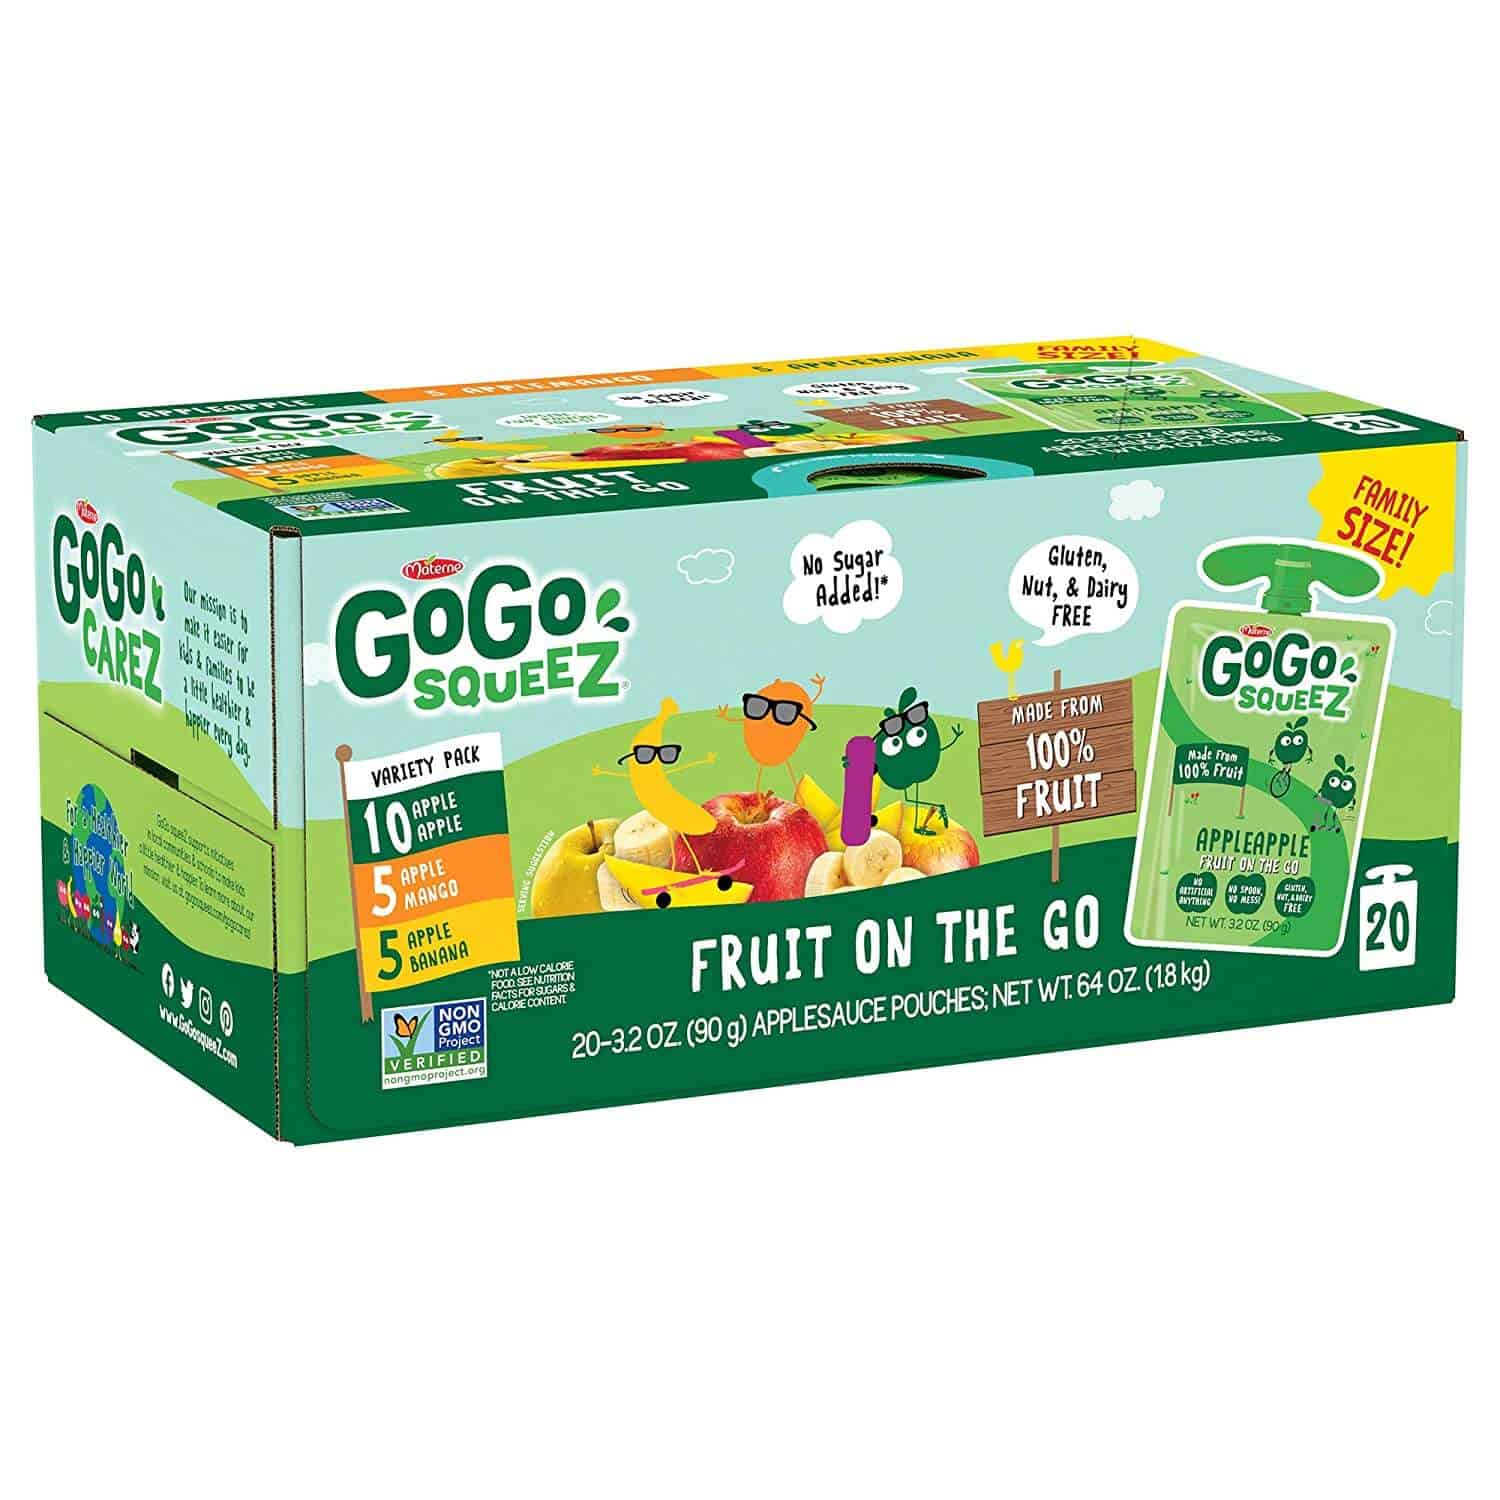 GoGo squeeZ Applesauce on the Go, Variety Pack ONLY $9.29